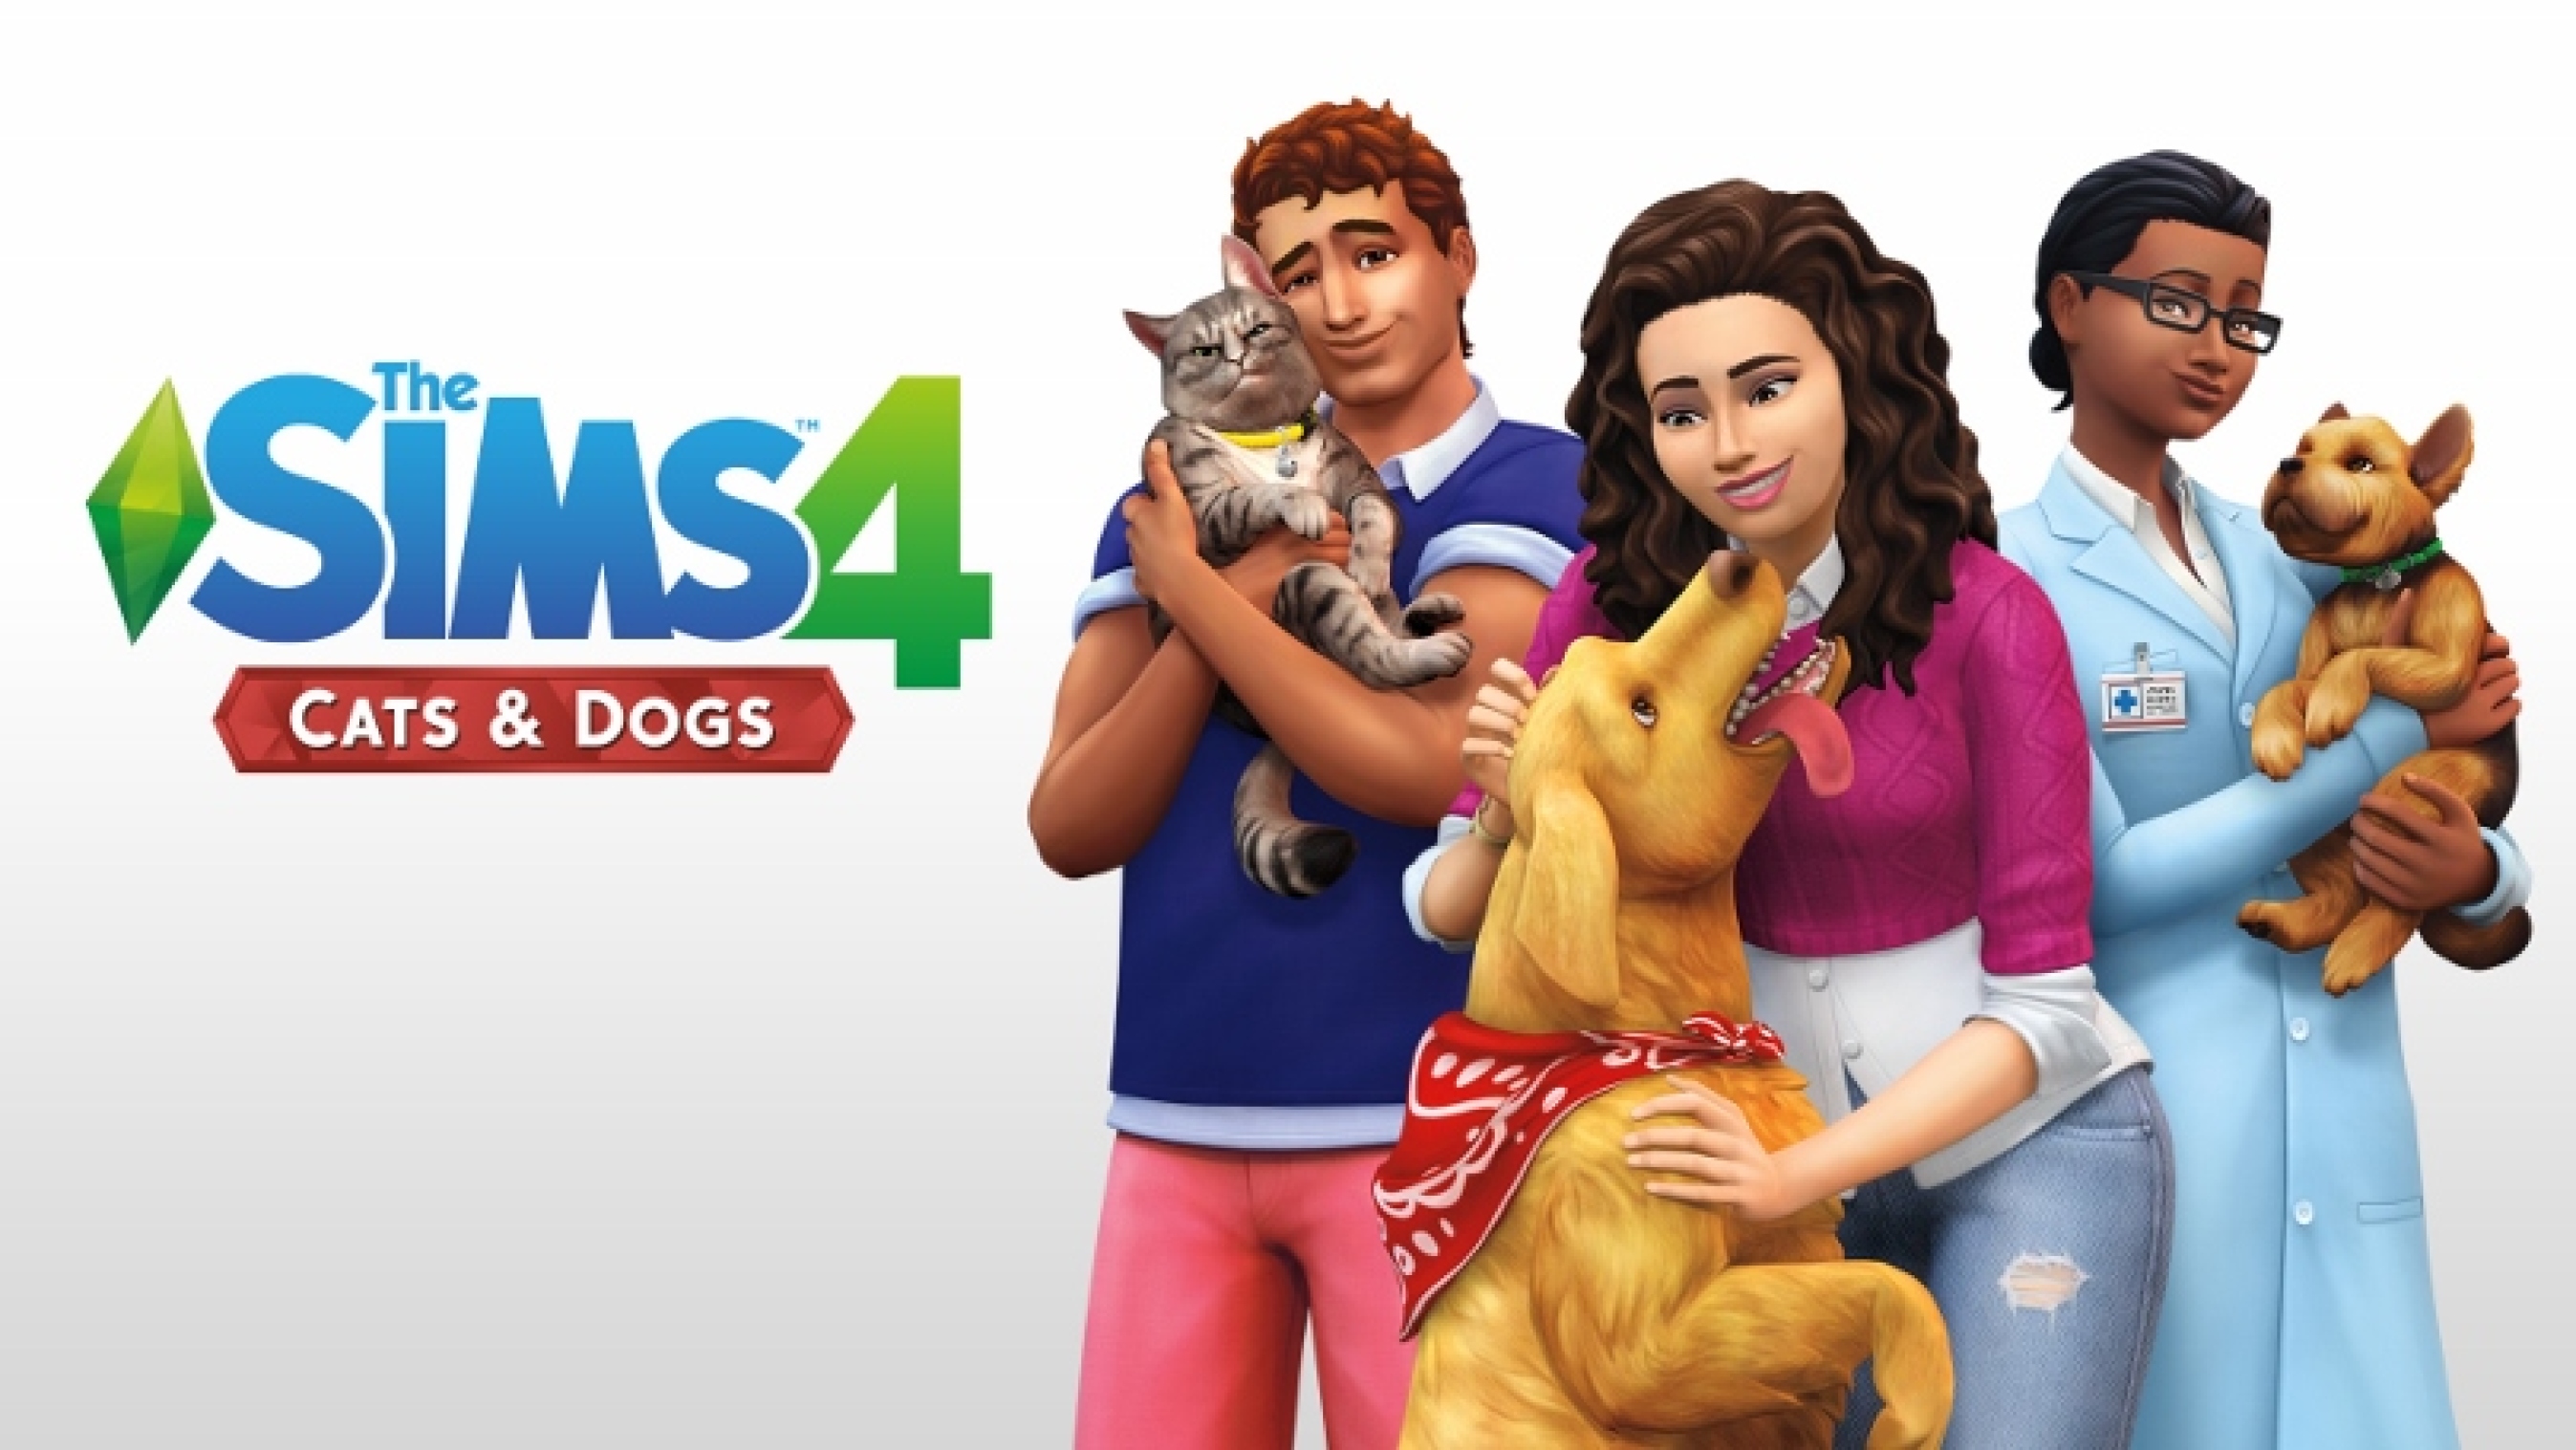 Симс петс. The SIMS 4. кошки и собаки. Cats & Dogs симс 4. The SIMS 4 кошка. SIMS 4 Cats and Dogs SIMS.